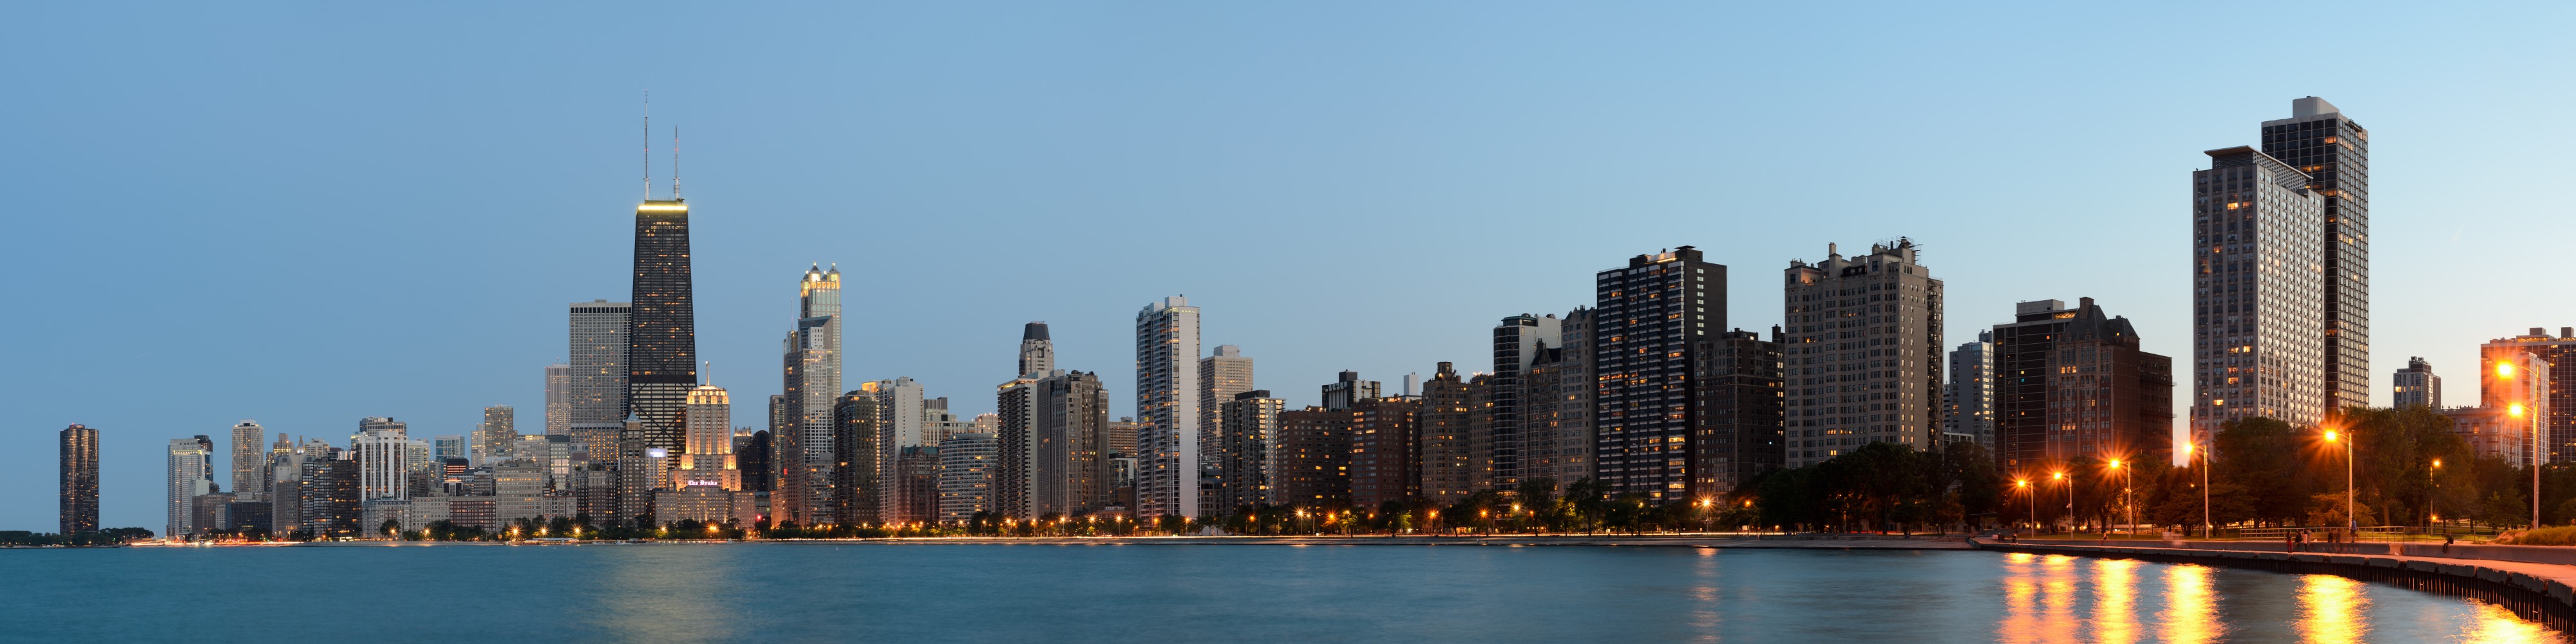 Chicago from North Avenue Beach June 2015 panorama 2